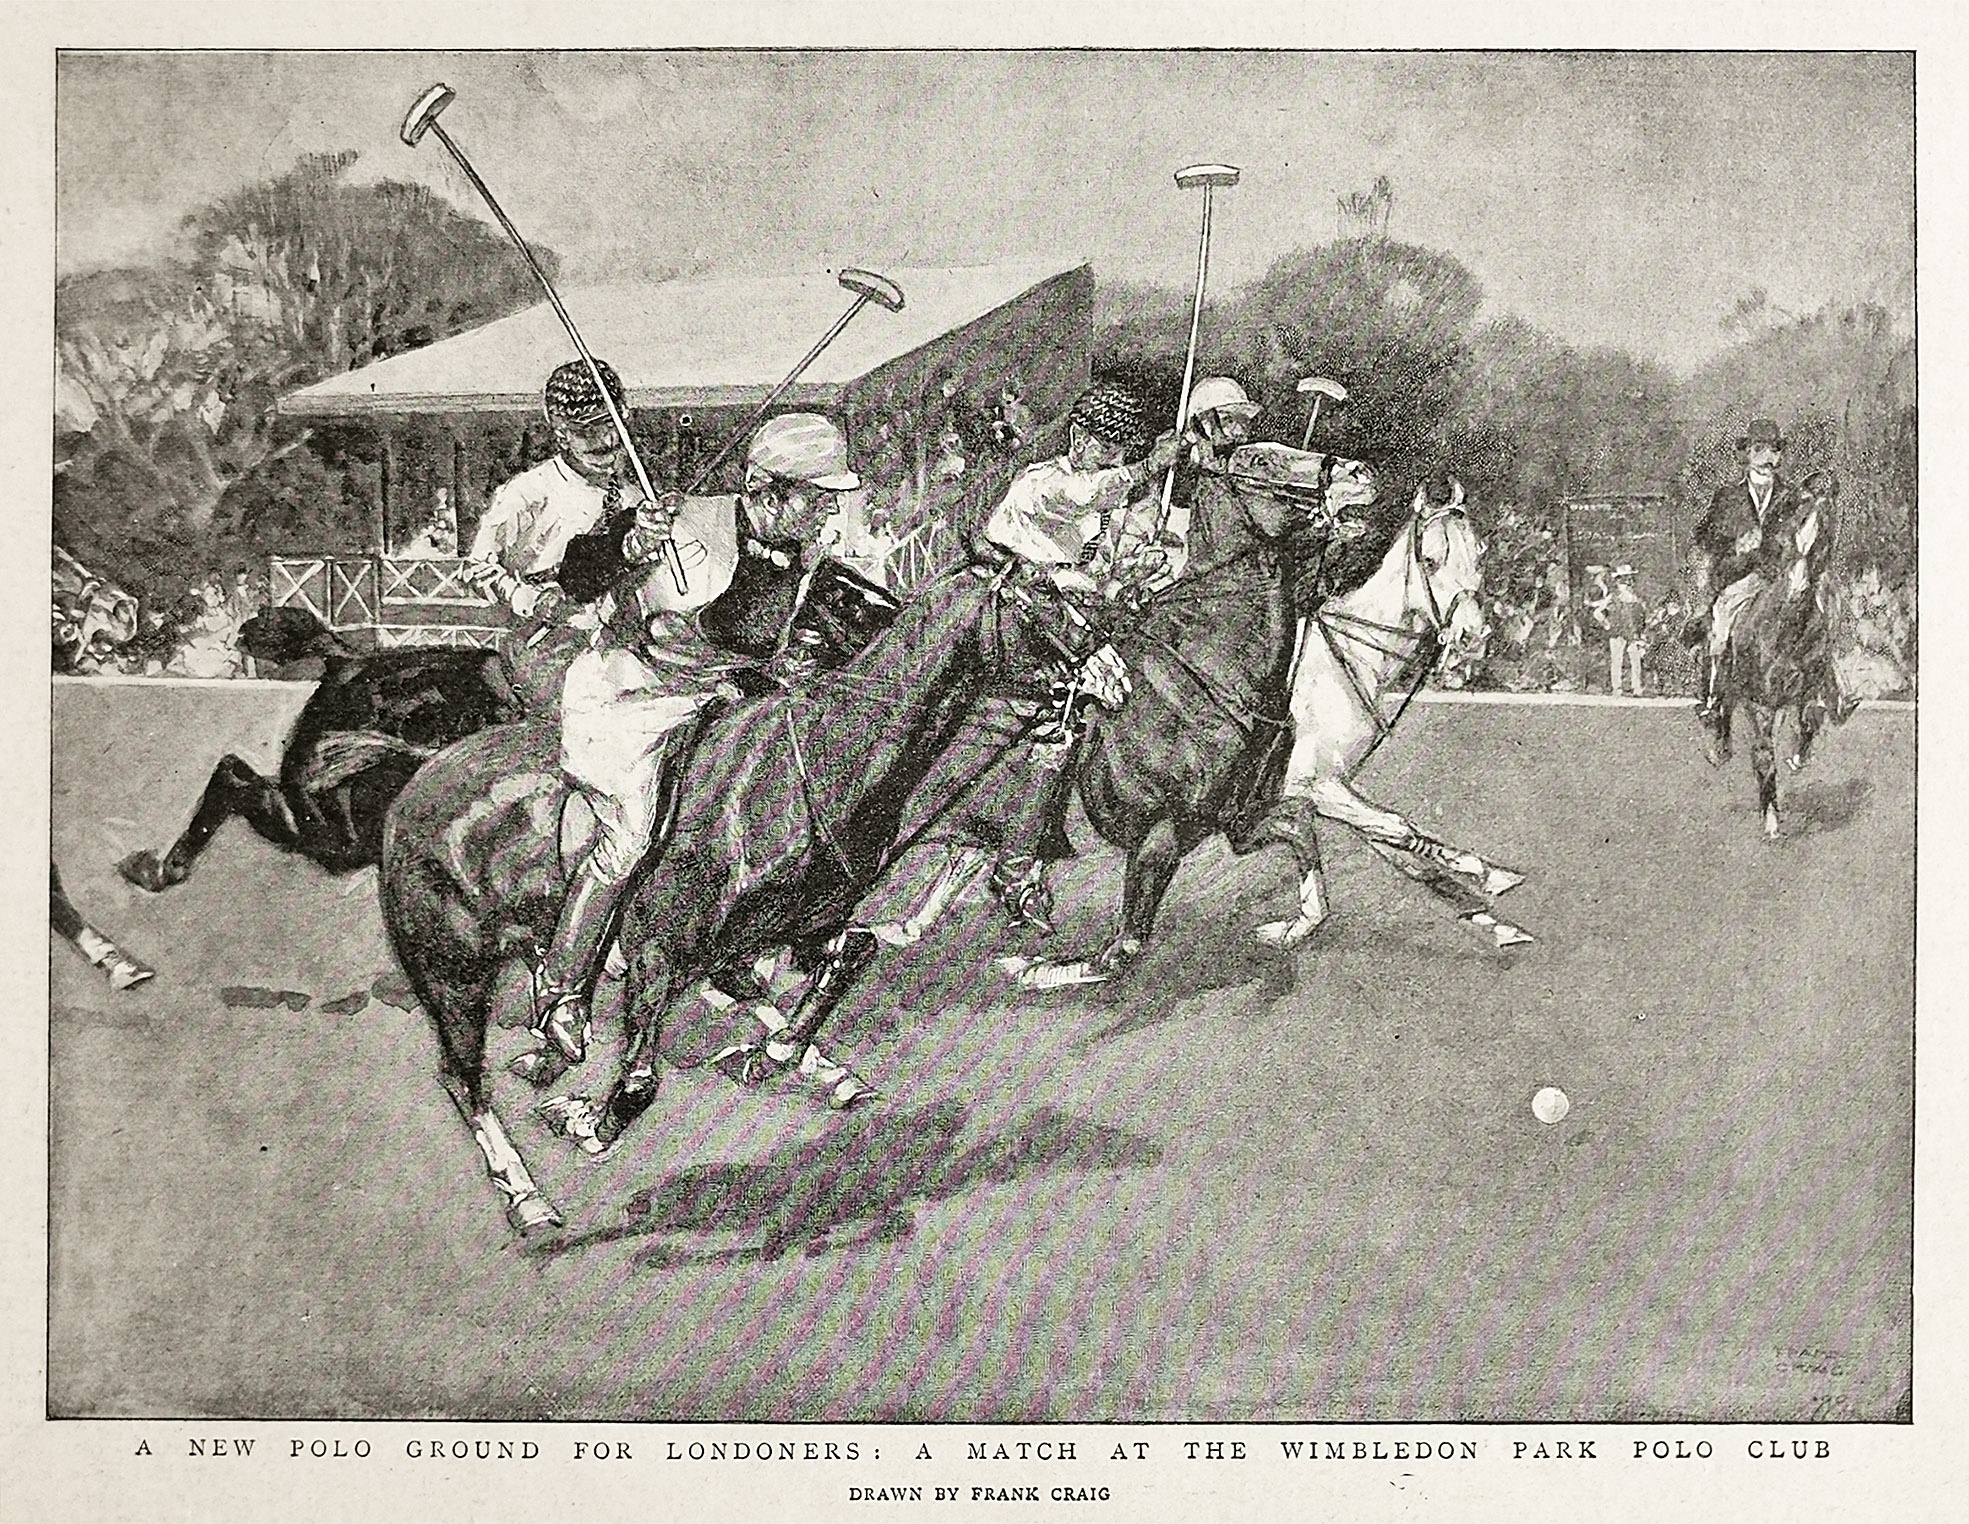 A New Polo Ground for Londoners: a Match at the Wimbledon Park Polo Club. - Antique Print from 1899